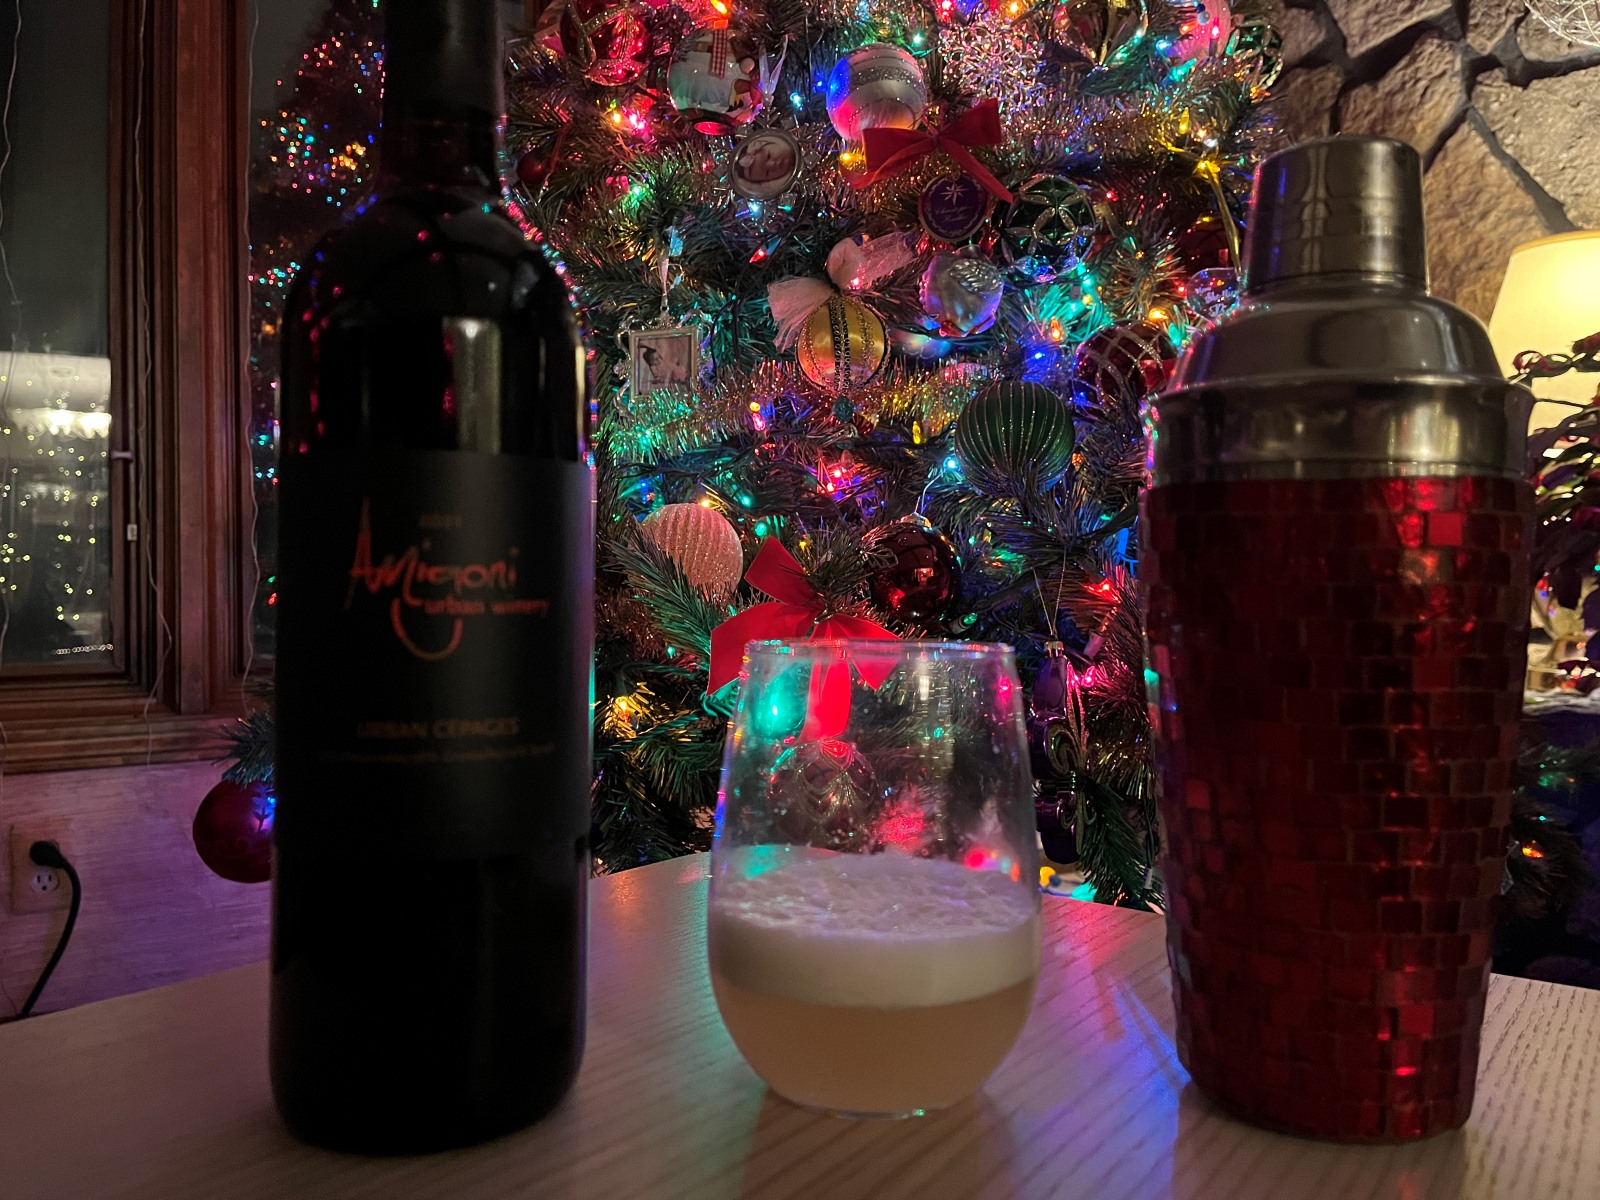 A bottle of wine, a cocktail and a cocktail shaker sit on a table in front of a Christmas tree